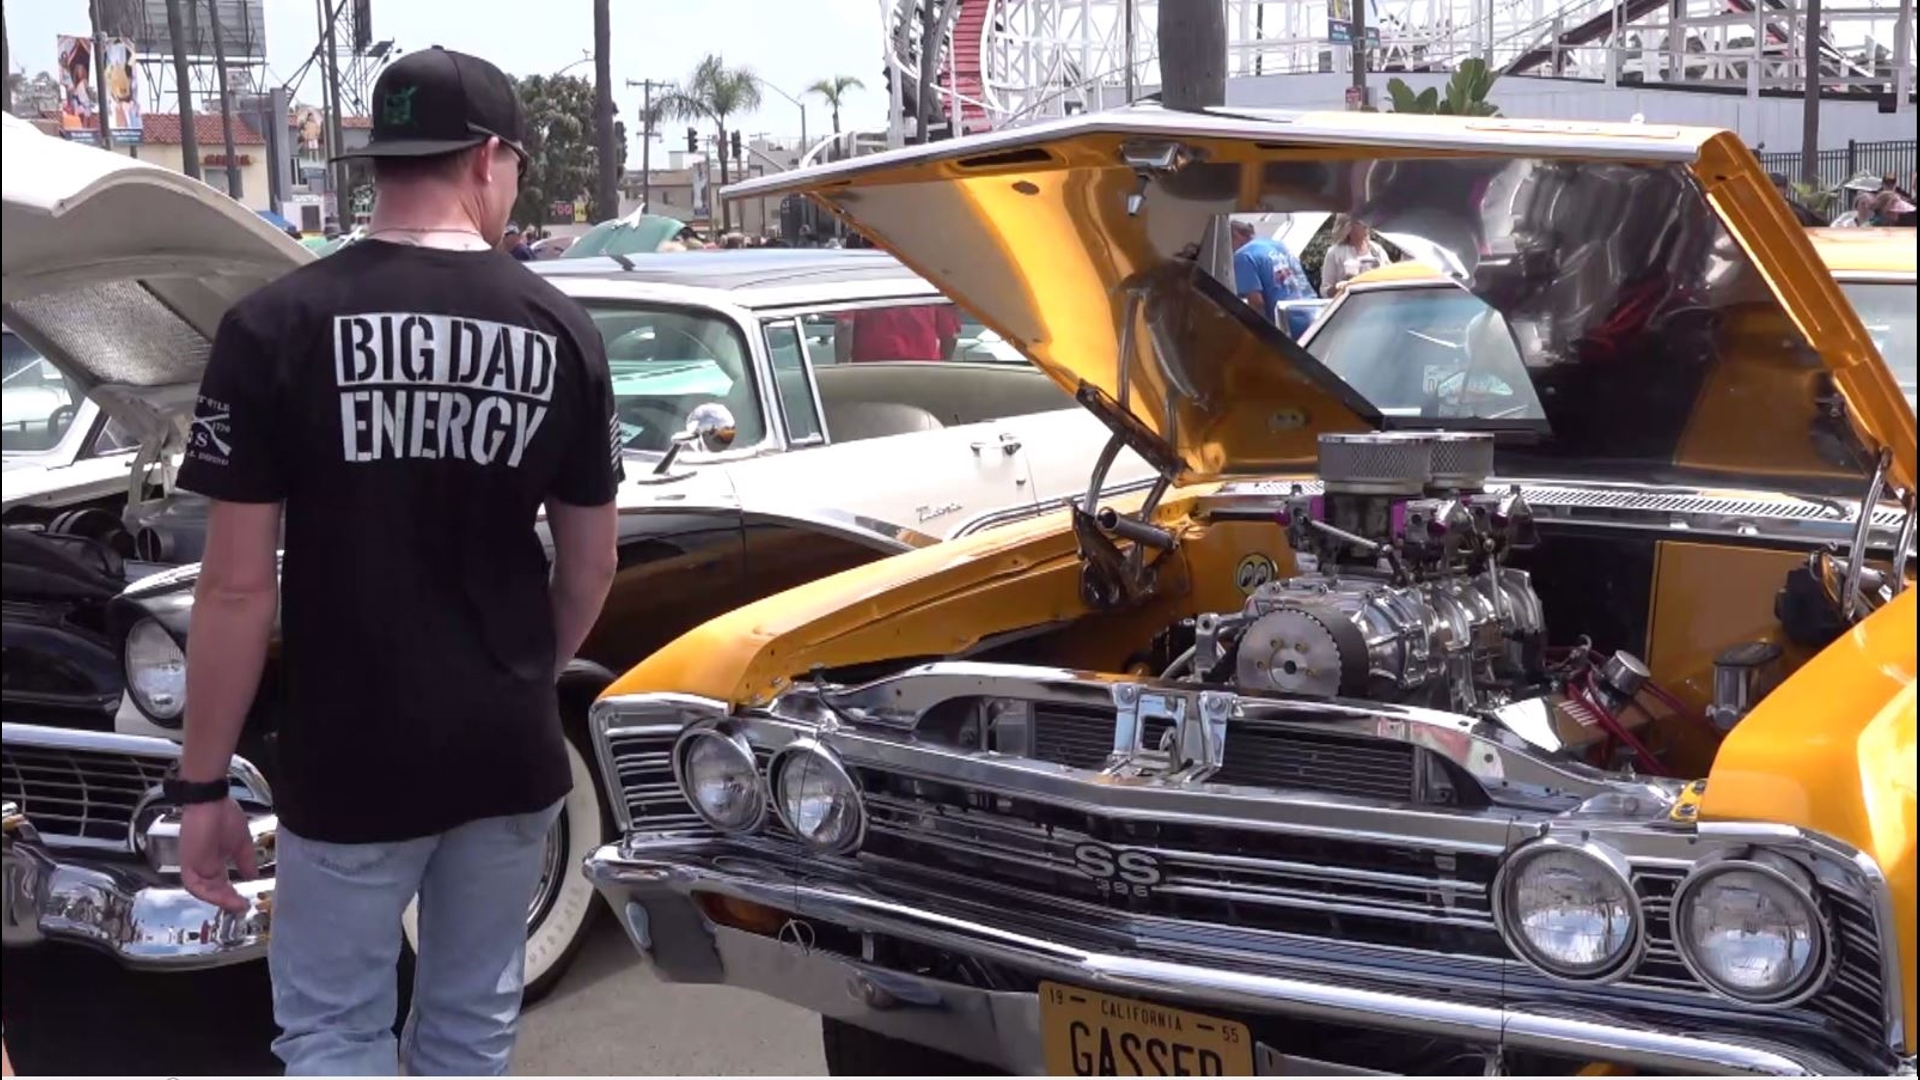 More than 150 cars — including muscle cars, classic gems and modified racers — attended the 11th-annual car show in San Diego.